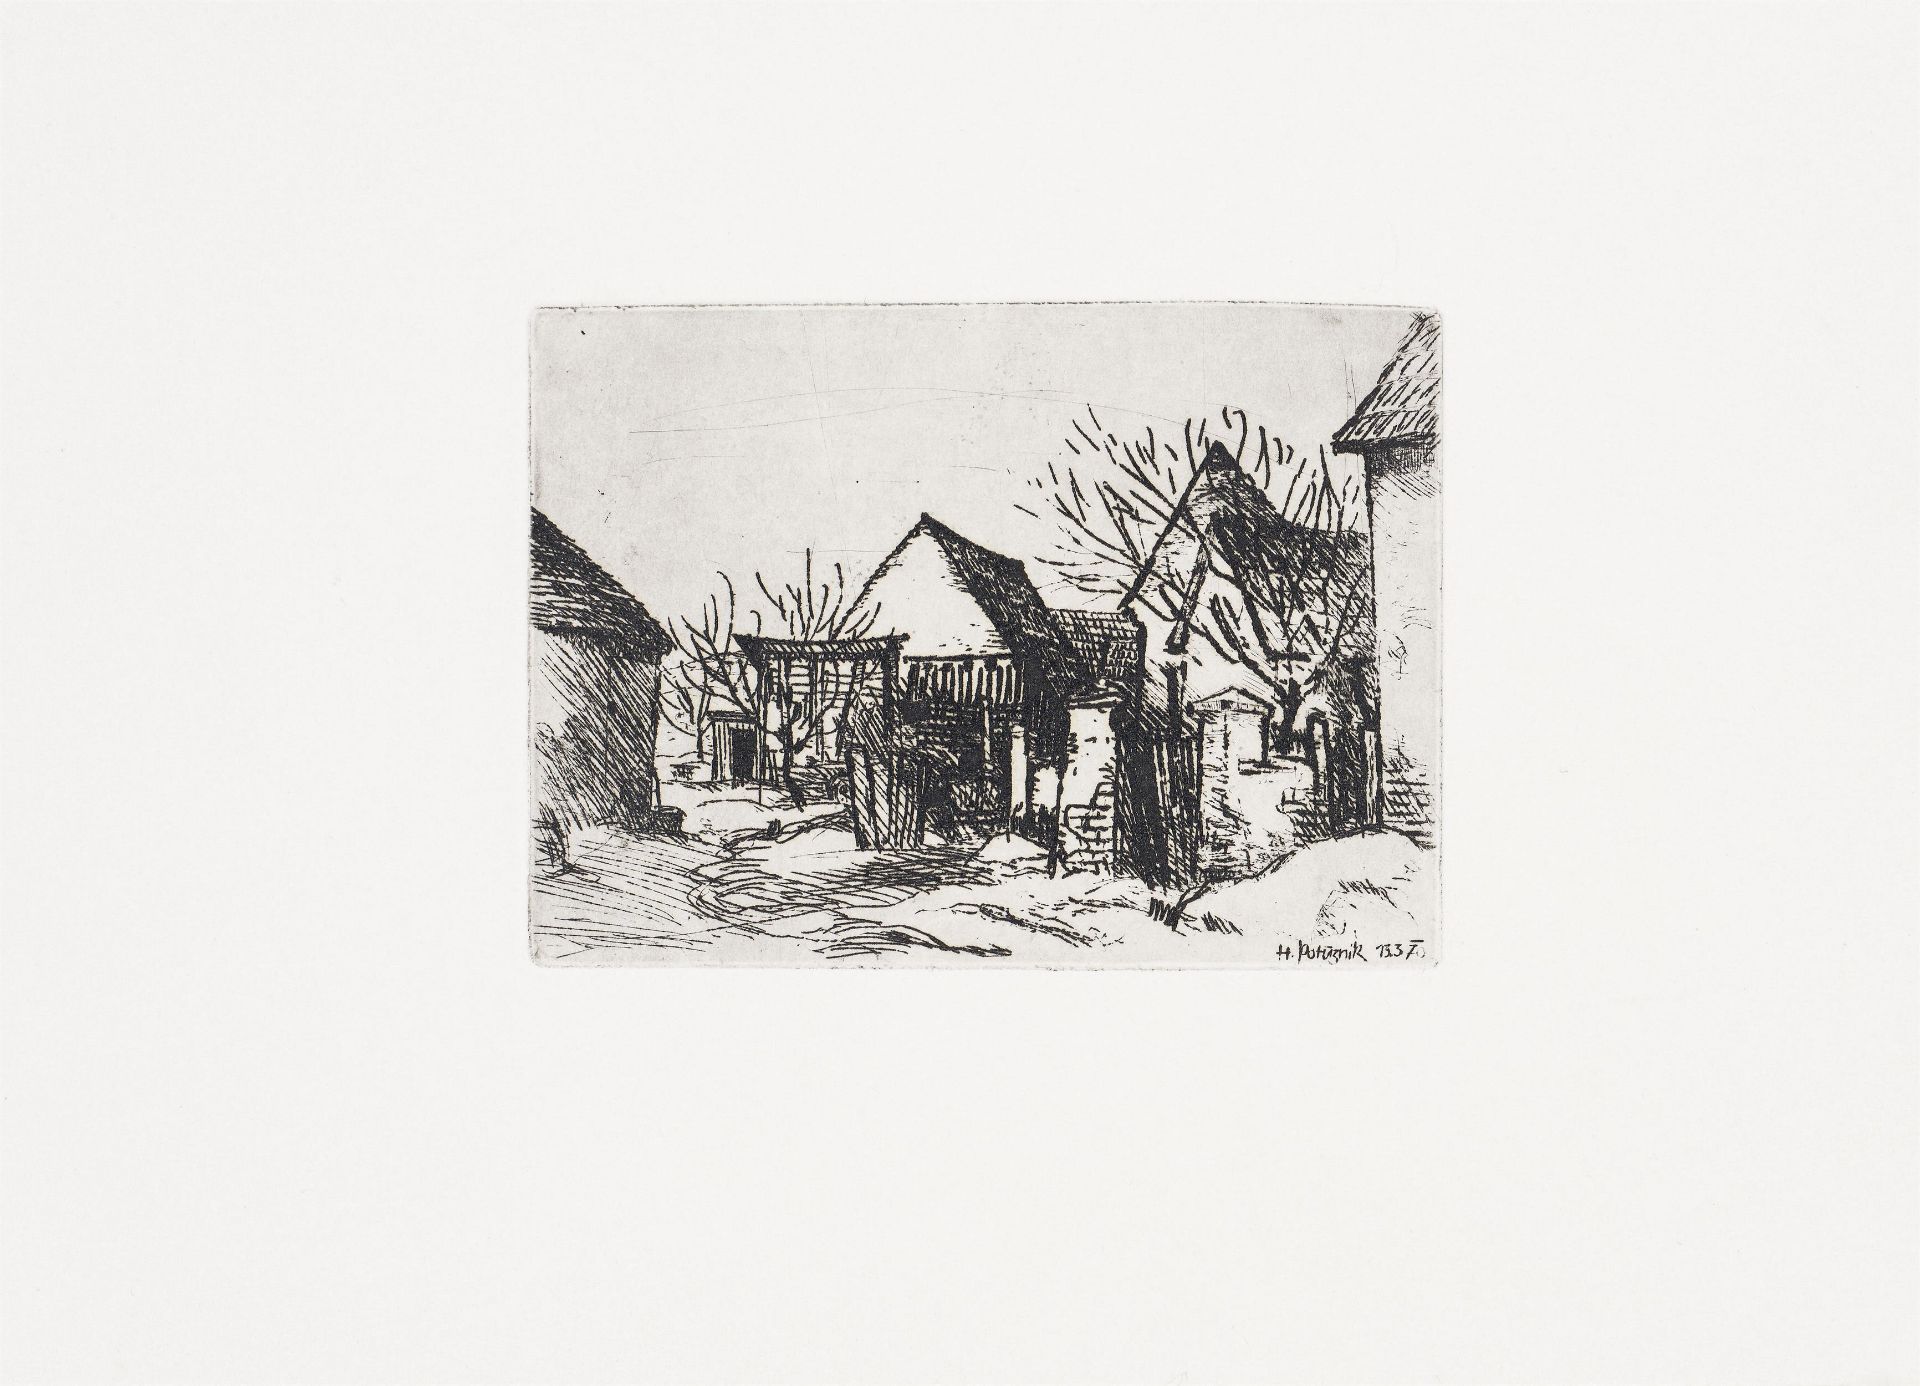 Heribert Potuznik and Georg Pevetz and  Carry Hauser et al.: Mixed lot: 29 works on paper - artists  - Image 20 of 30